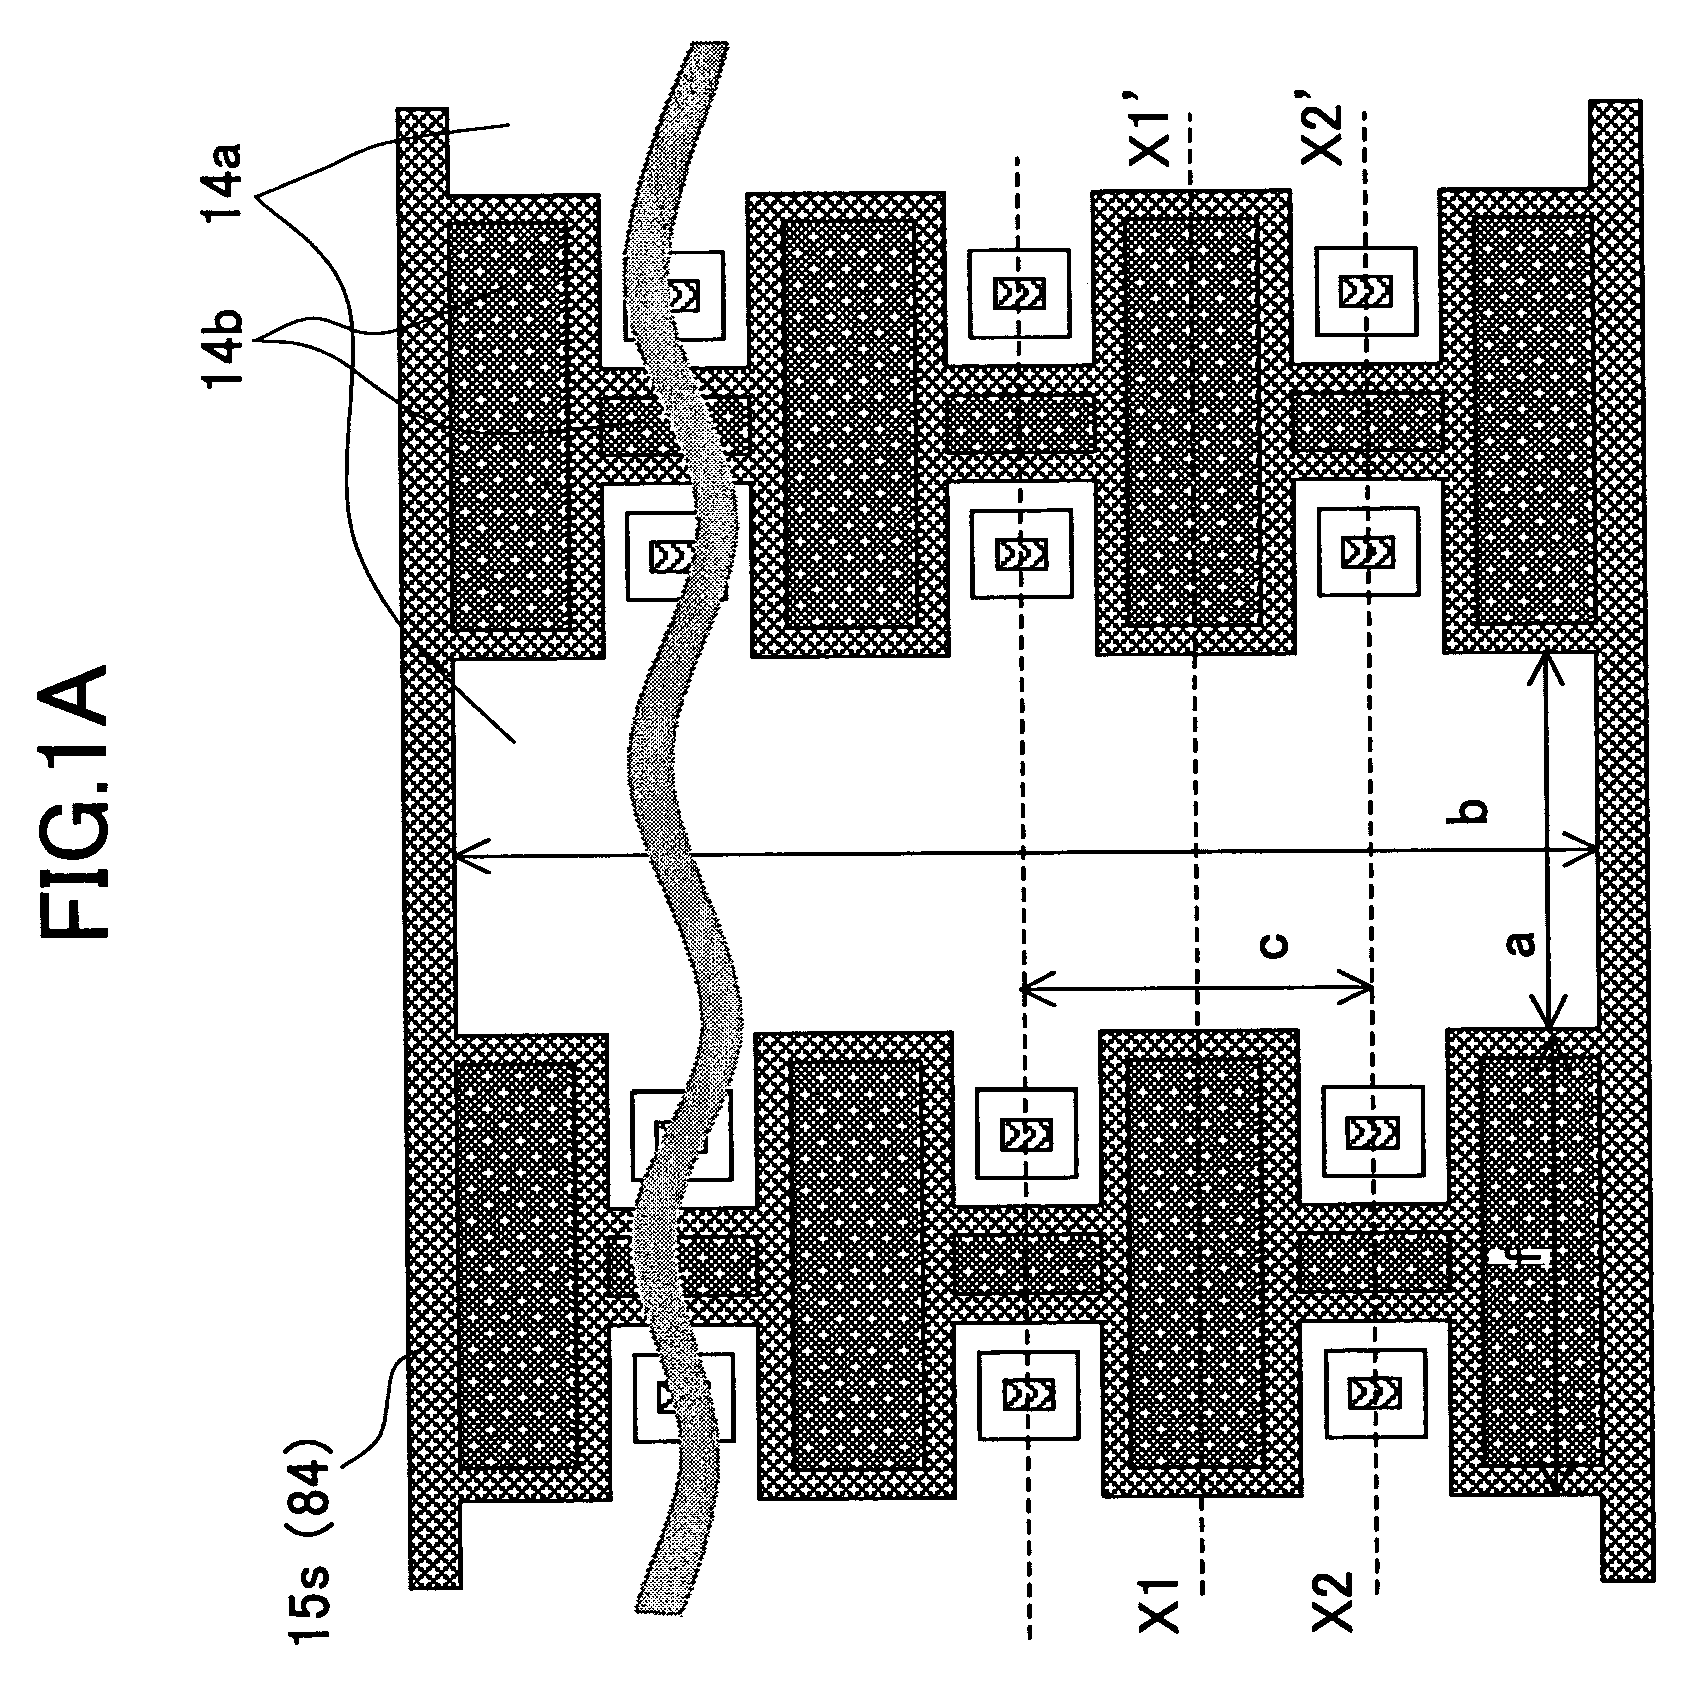 Electrostatic actuator formed by a semiconductor manufacturing process